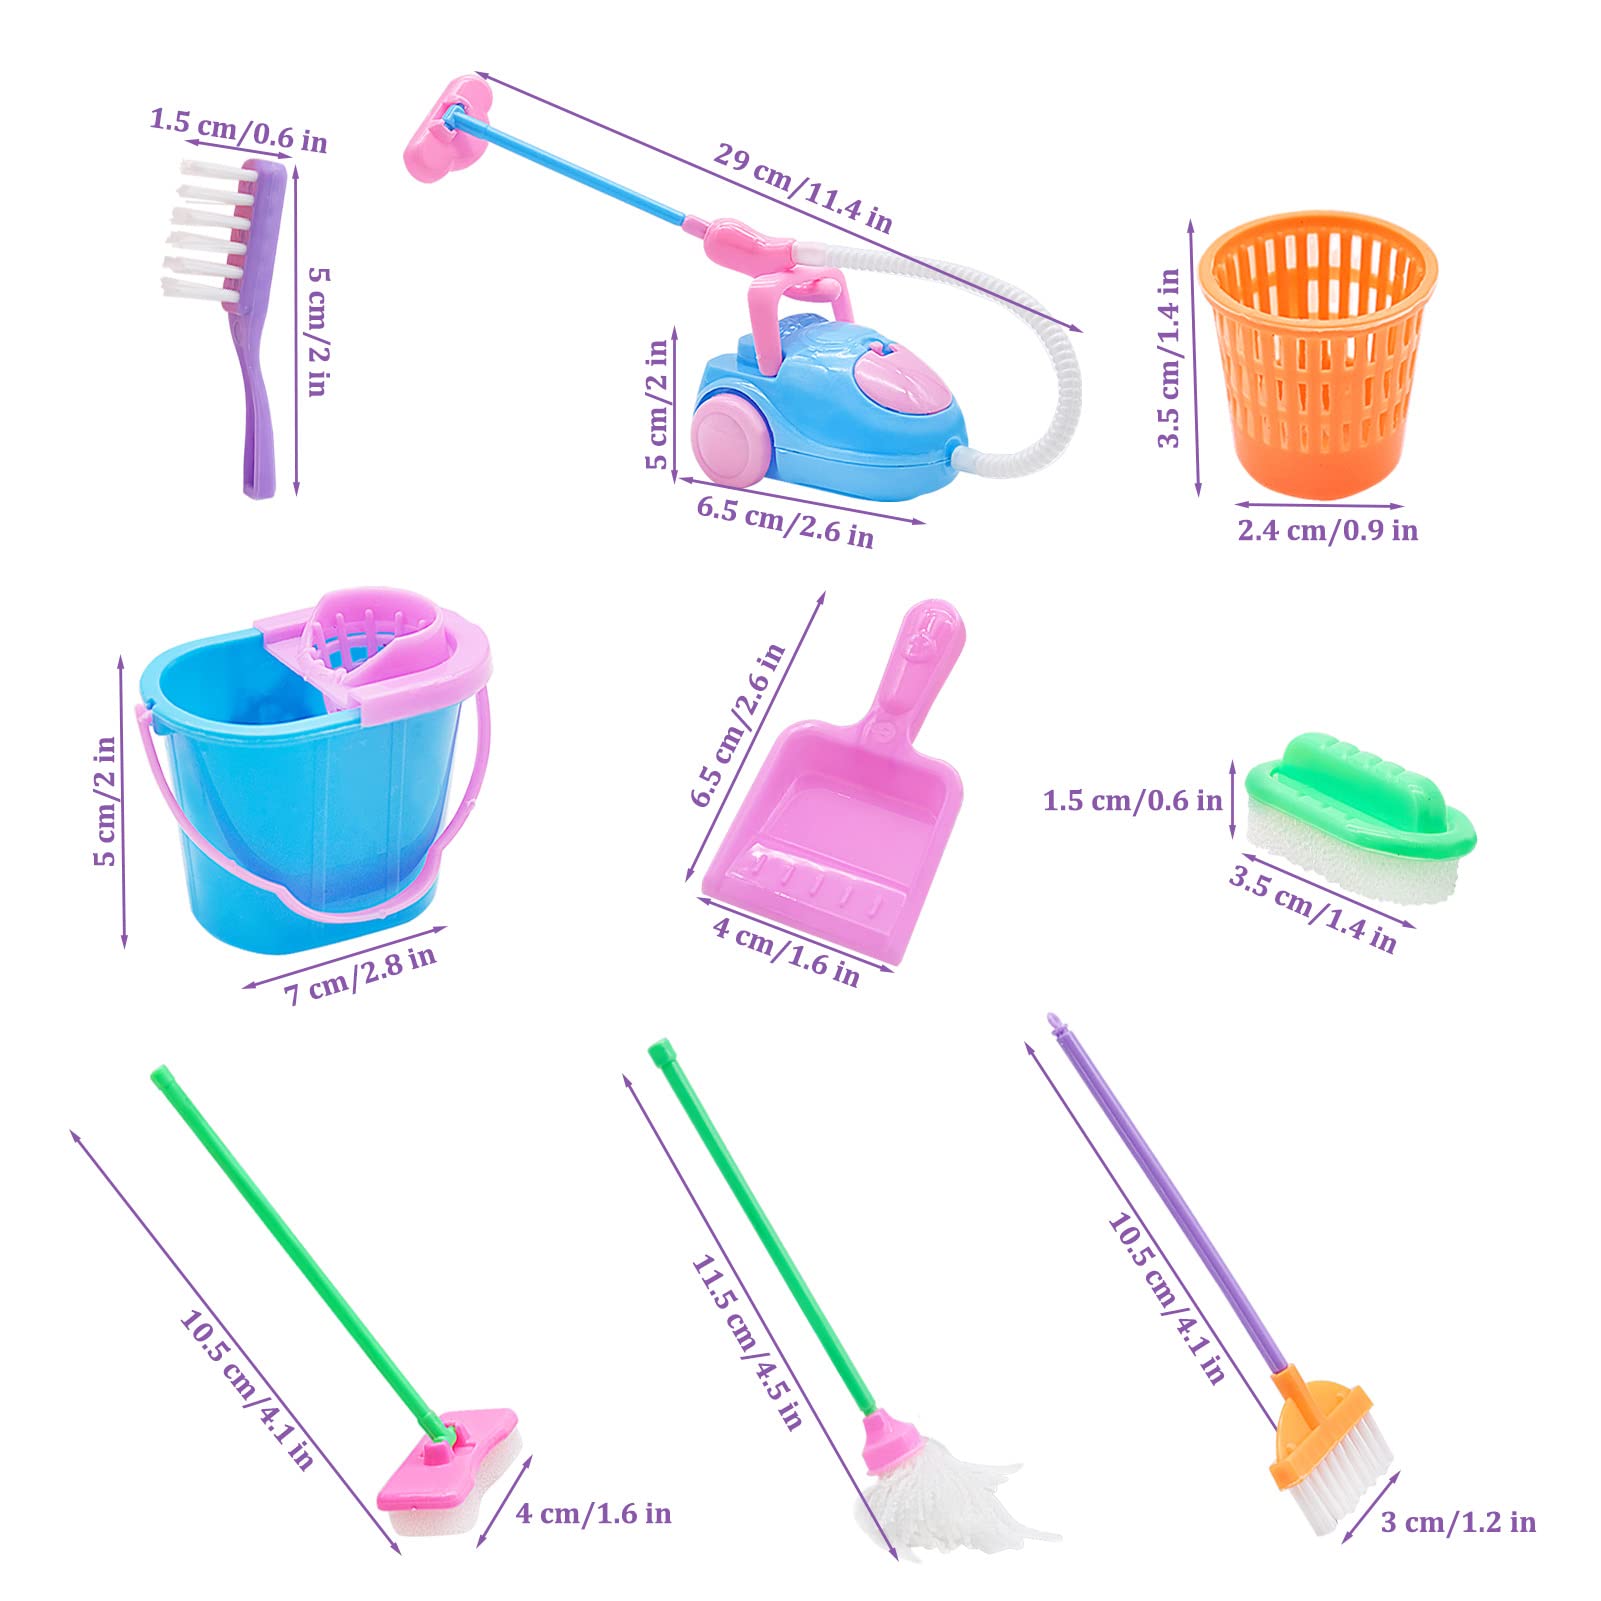 9 Pieces Miniature Dollhouse Cleaning Supplies, Mini Mop, Dustpan, Brush, Broom and Bucket Housework Tools, Doll House Accessories Pretend Play Decoration